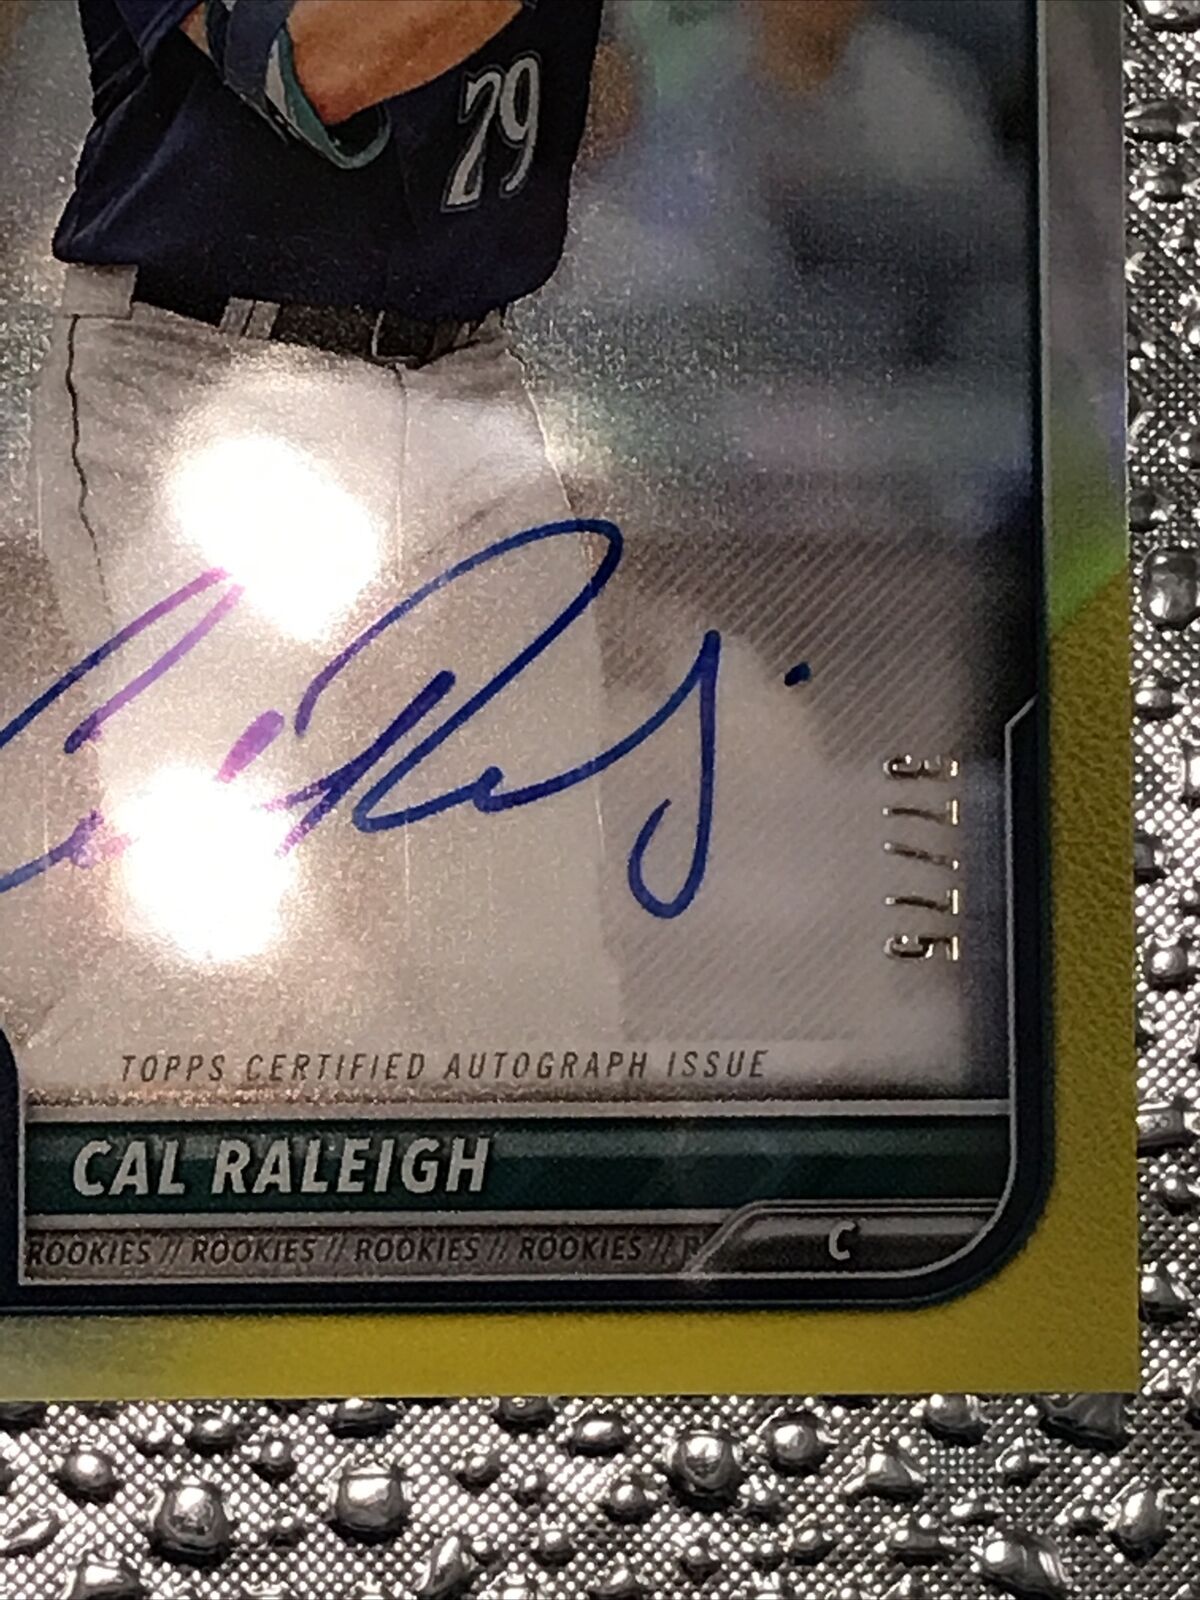 2022 Bowman Chrome Cal Raleigh MARINERS AUTOGRAPH AUTO YELLOW REFRACTOR RC /75 *